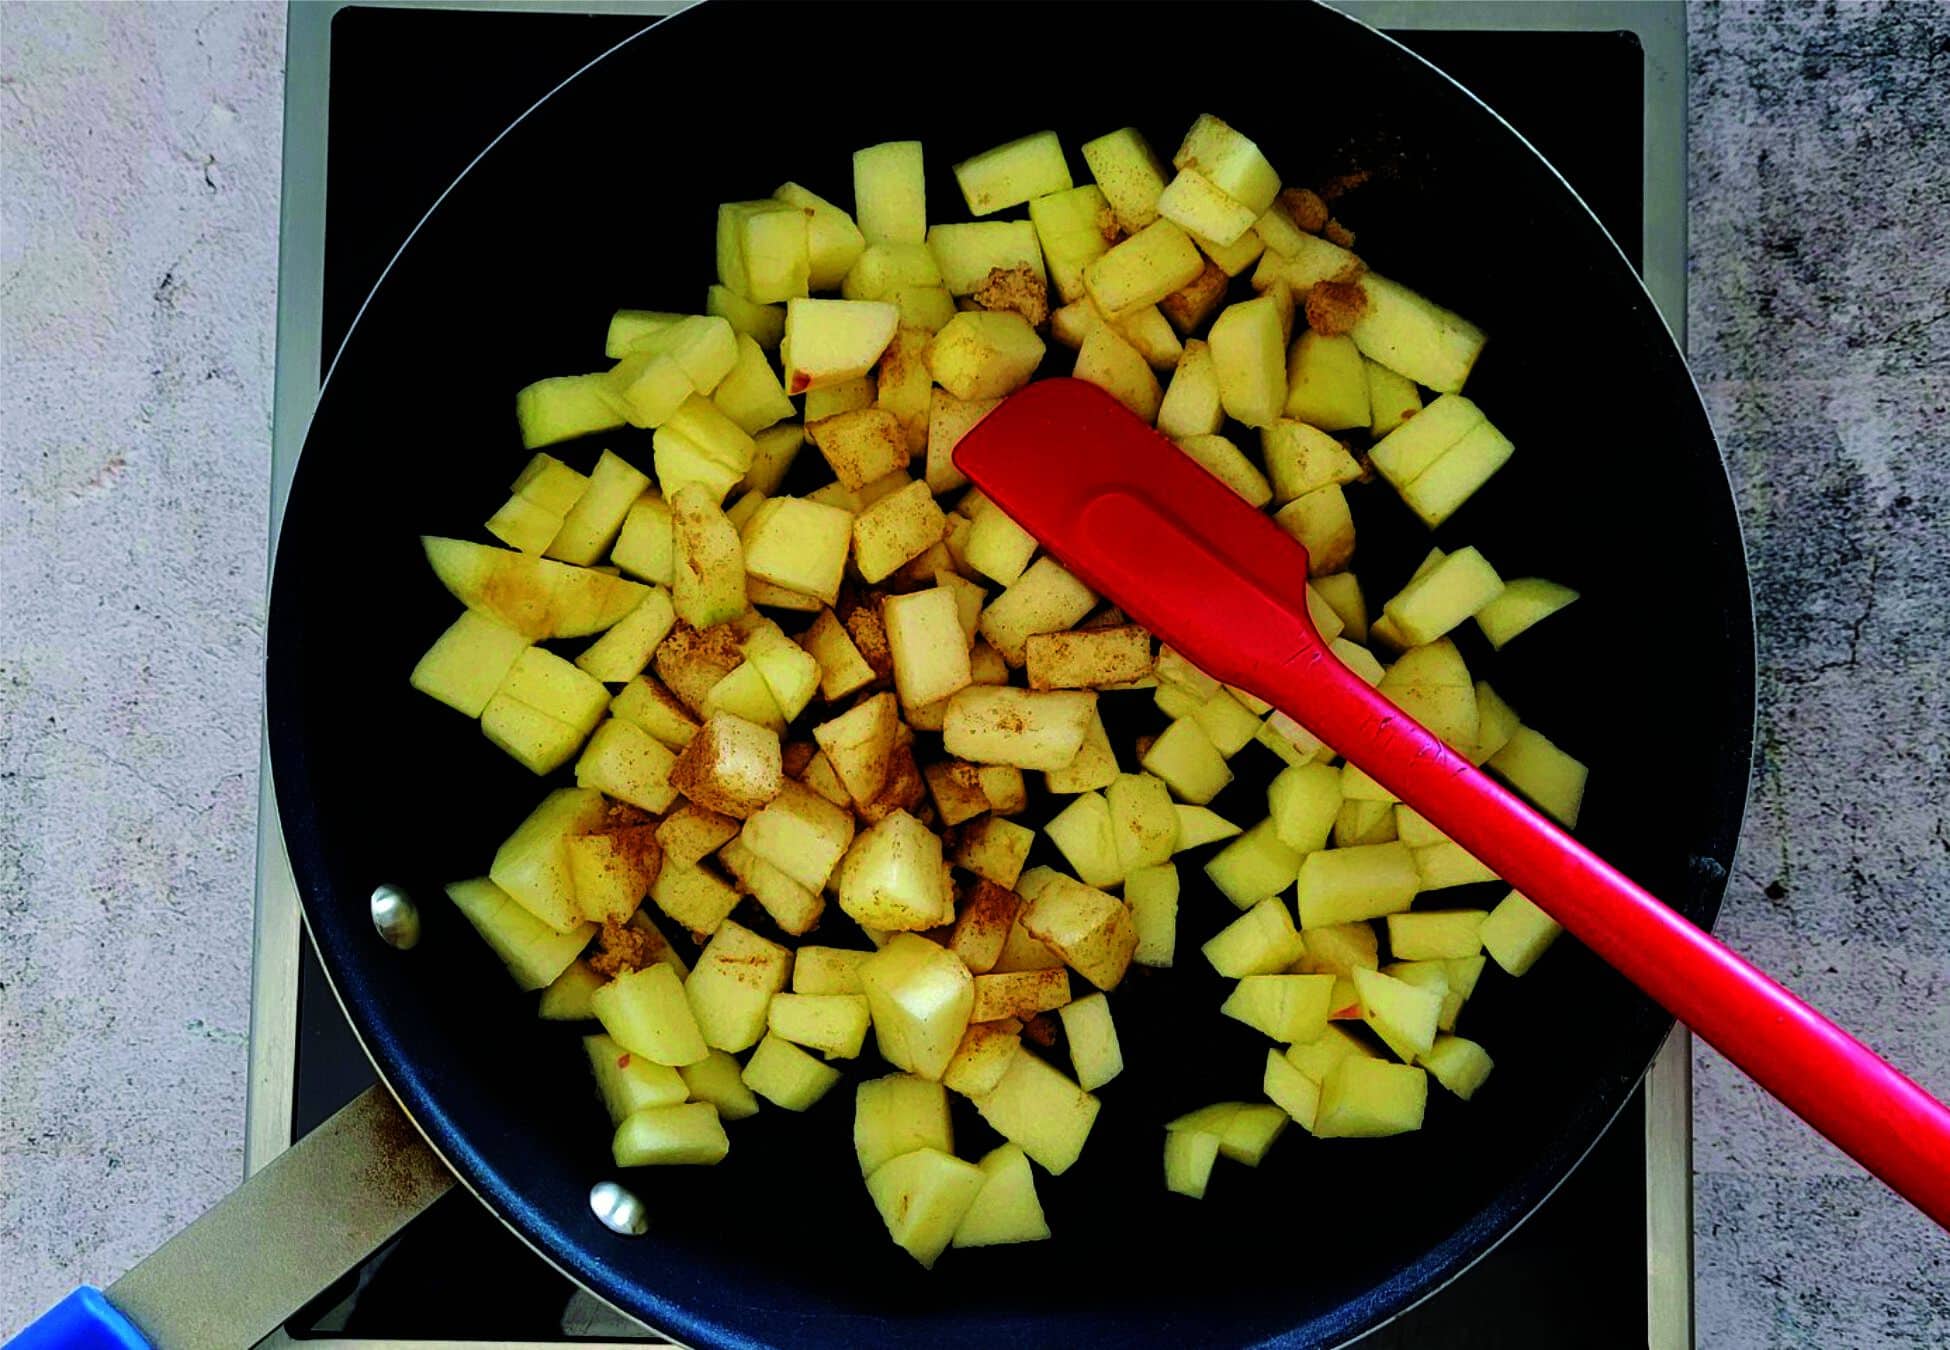 heating apples in a saucepan with sugar and spices